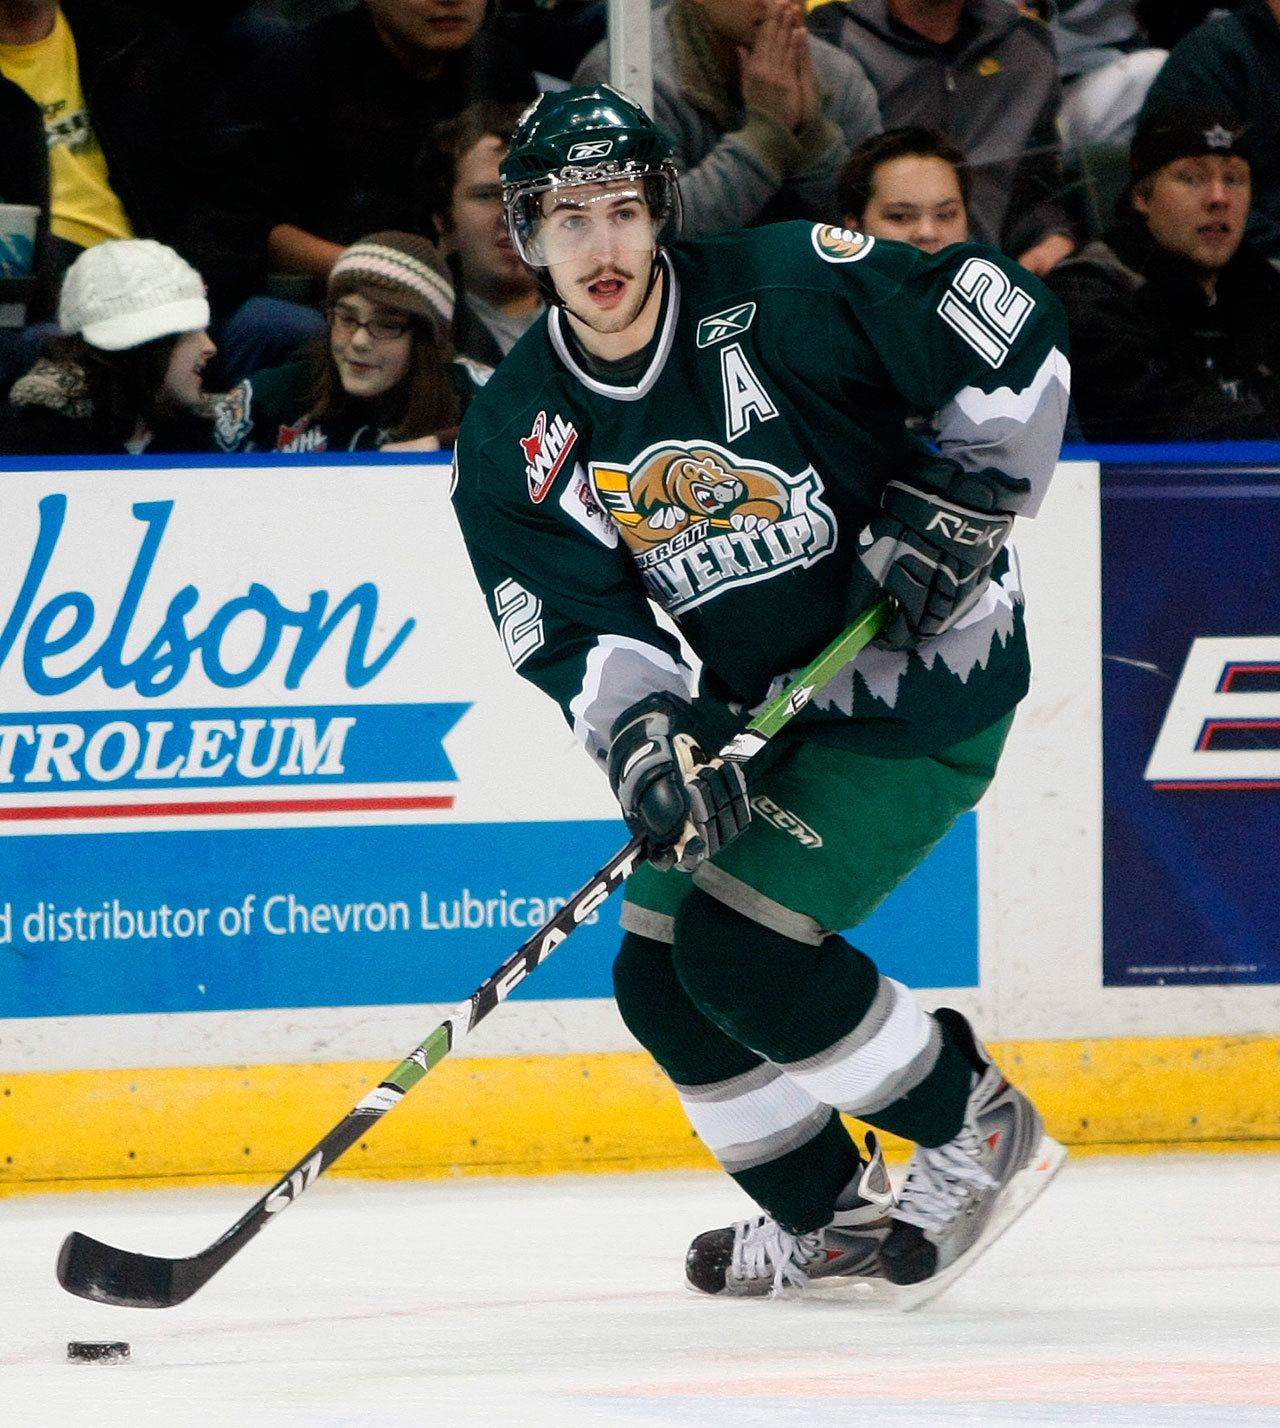 A trade the Silvertips made sending forward Kyle Beach, shown here during a game in 2008, to Lethbridge is still having effects on the team today. (Jennifer Buchanan / The Herald)